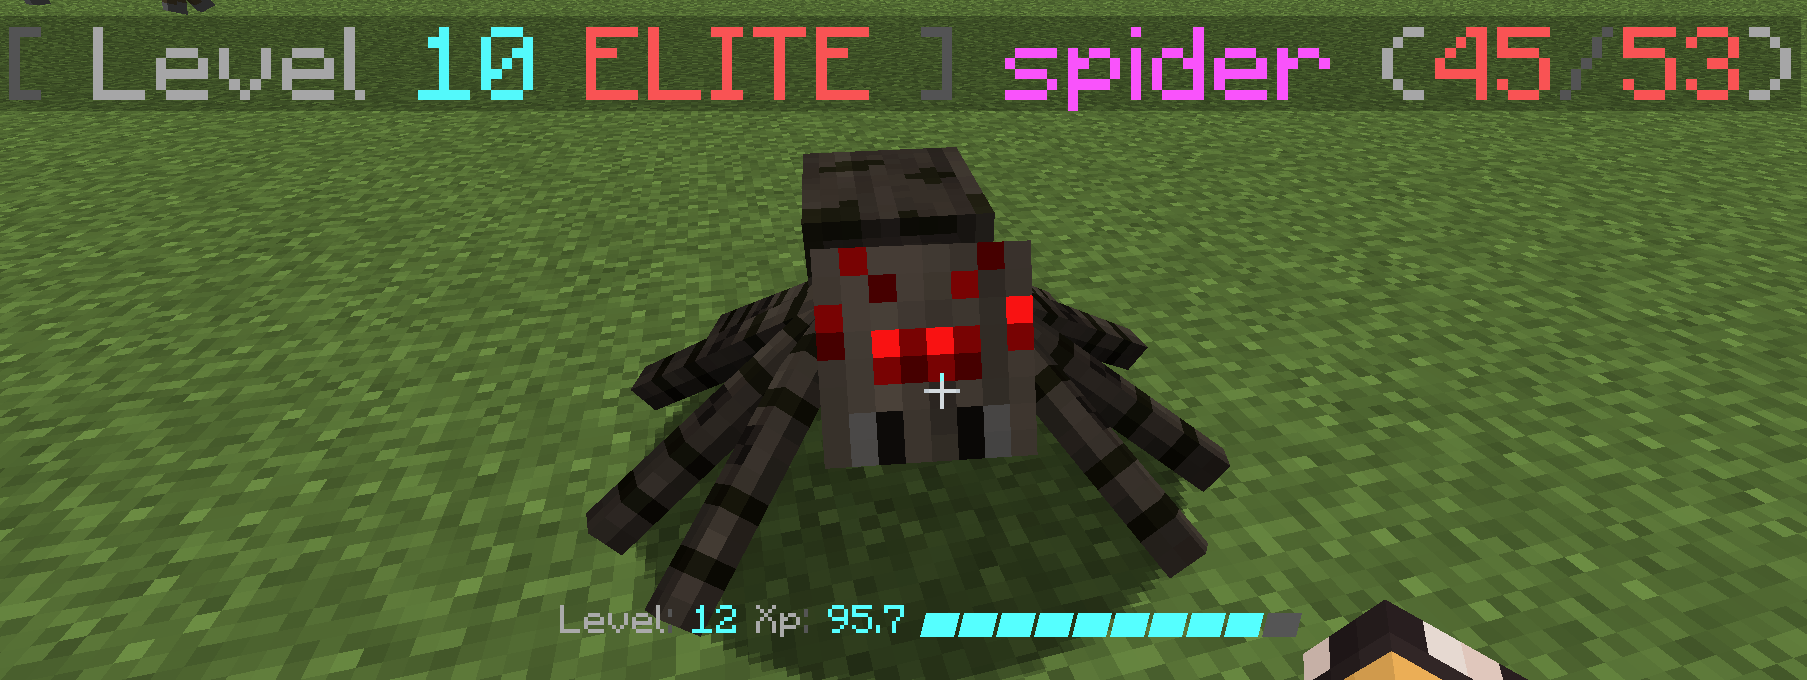 leabispider2.PNG